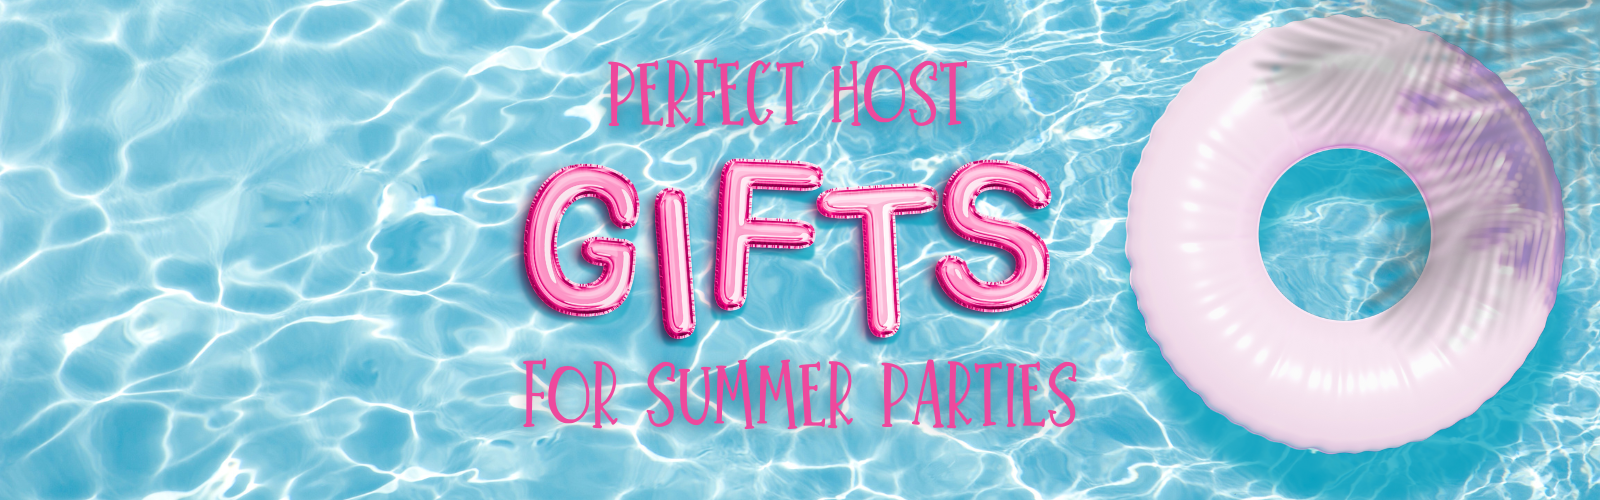 Perfect Host Gifts for Summer Parties